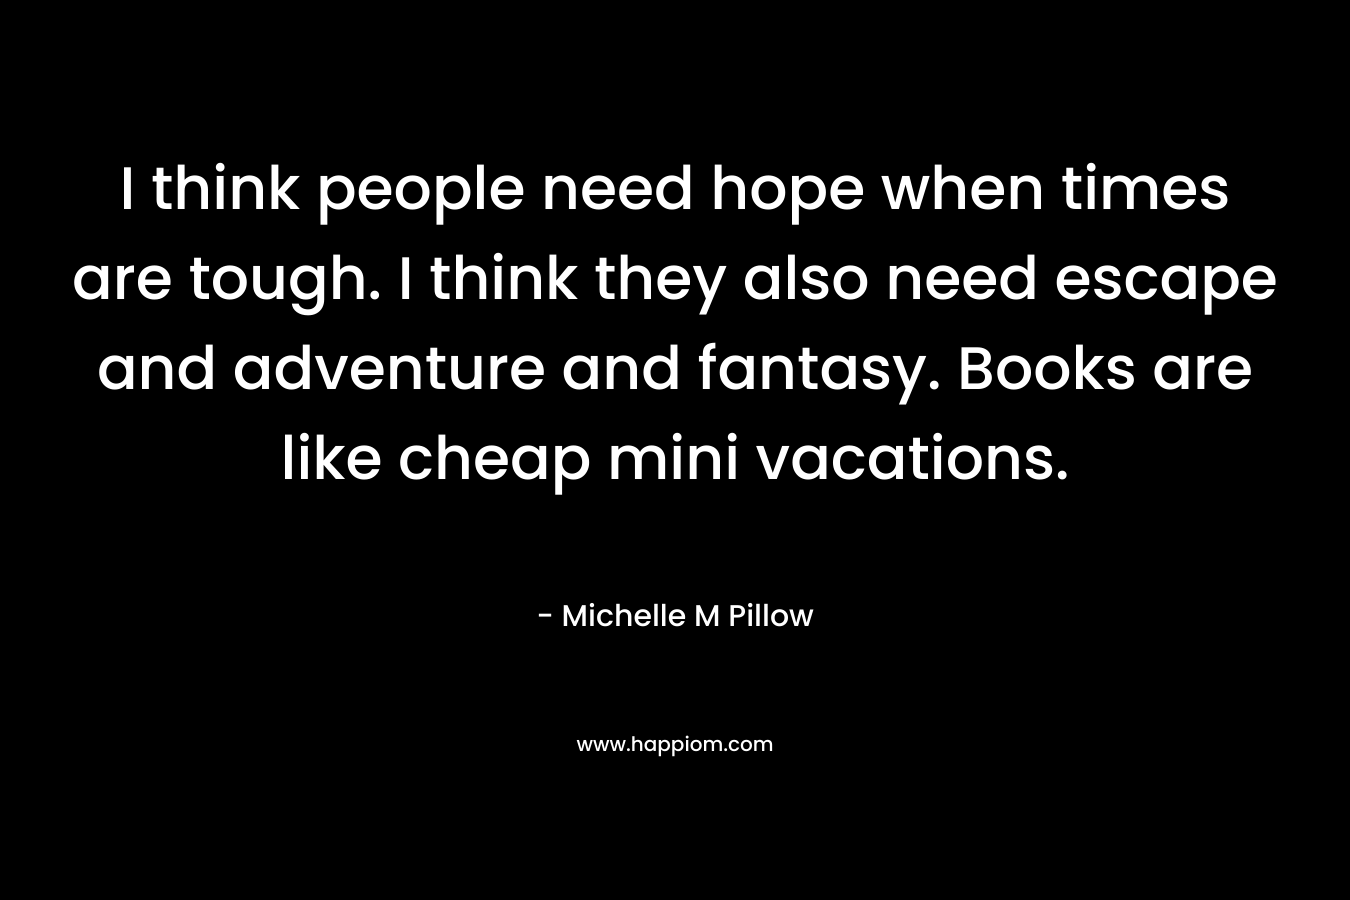 I think people need hope when times are tough. I think they also need escape and adventure and fantasy. Books are like cheap mini vacations.